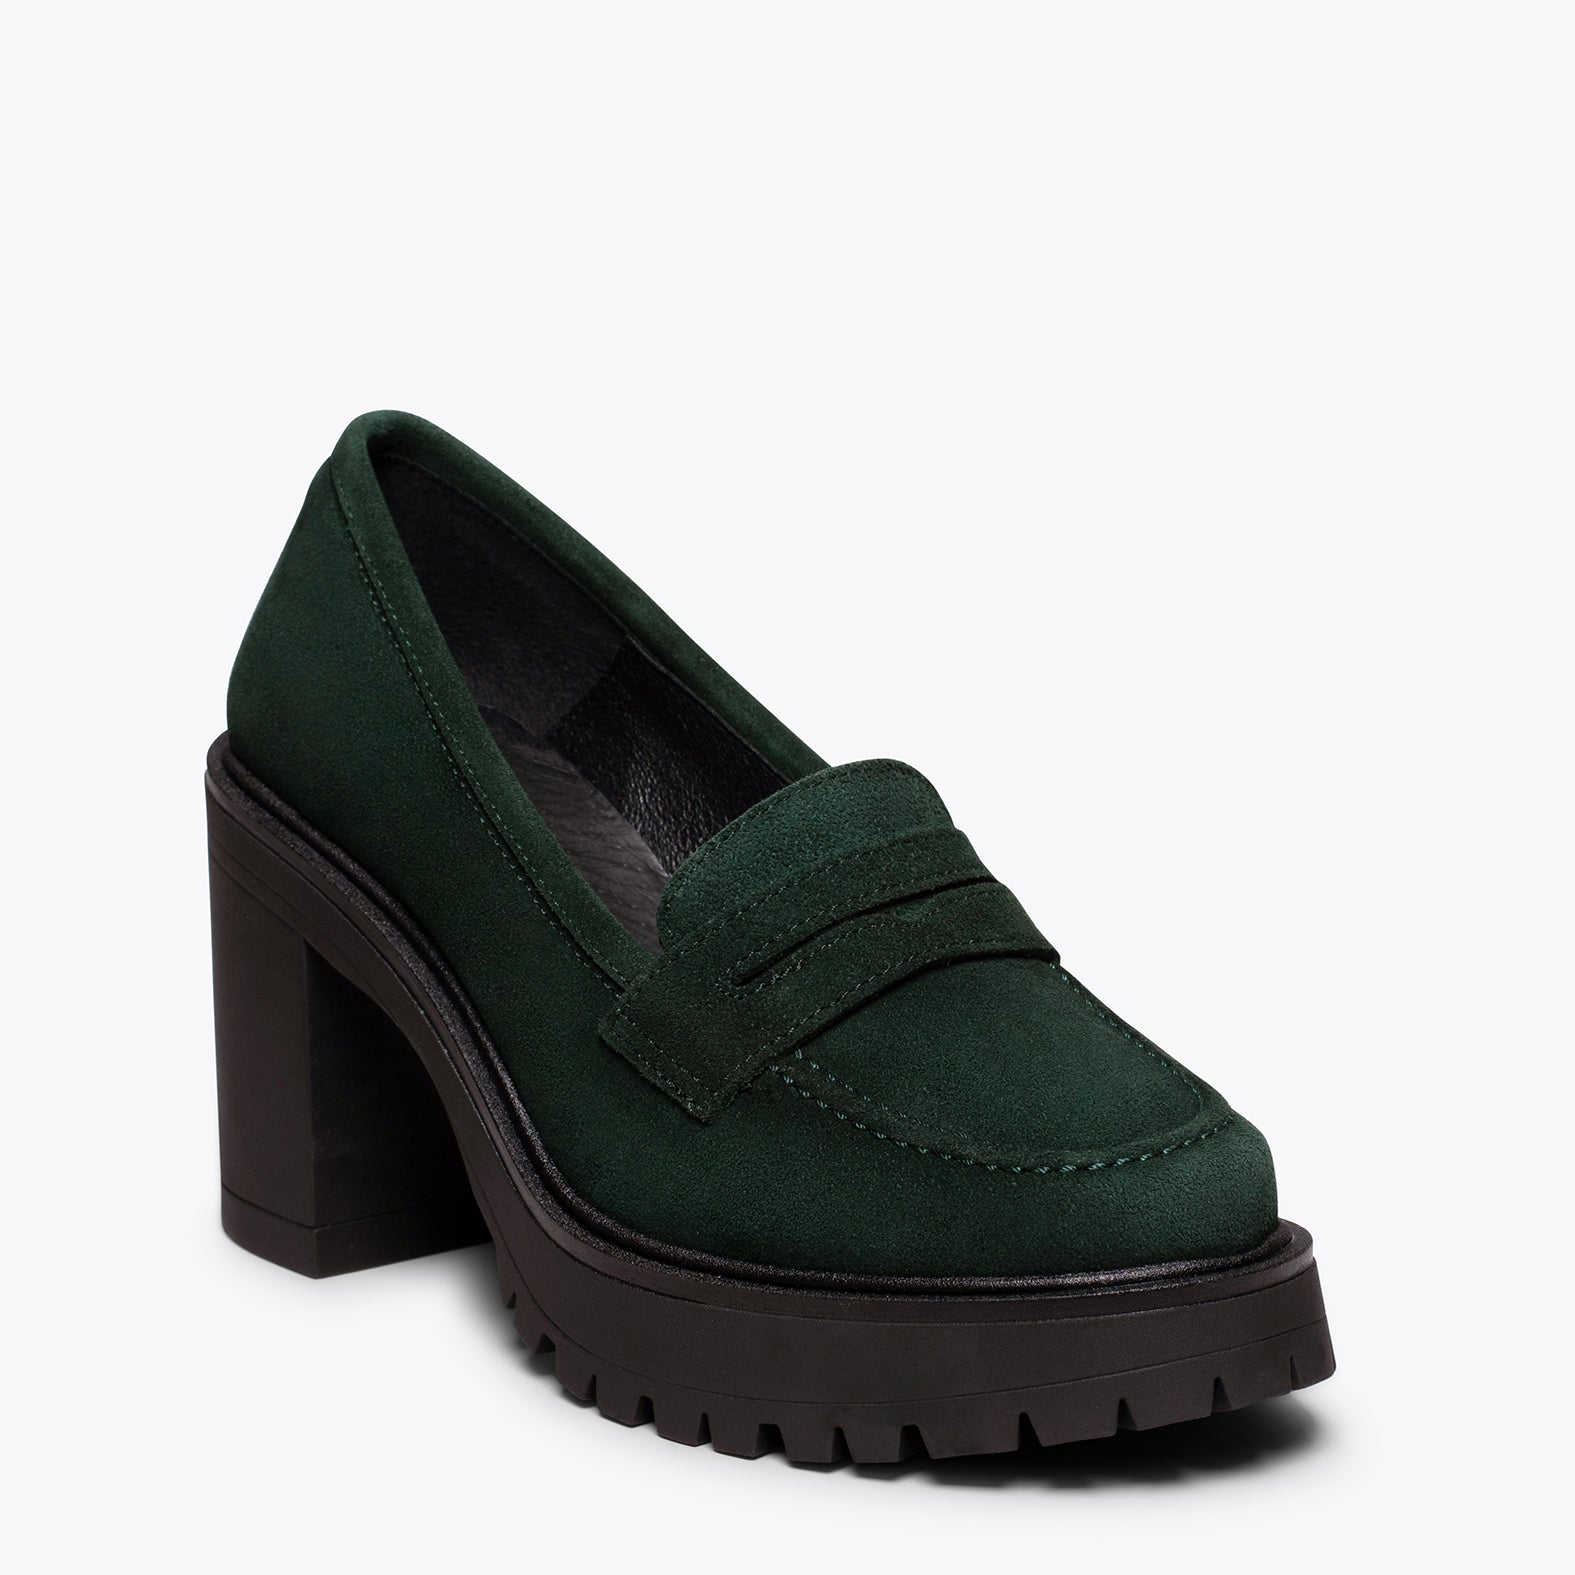 TRACK – GREEN high heel moccasin with track sole